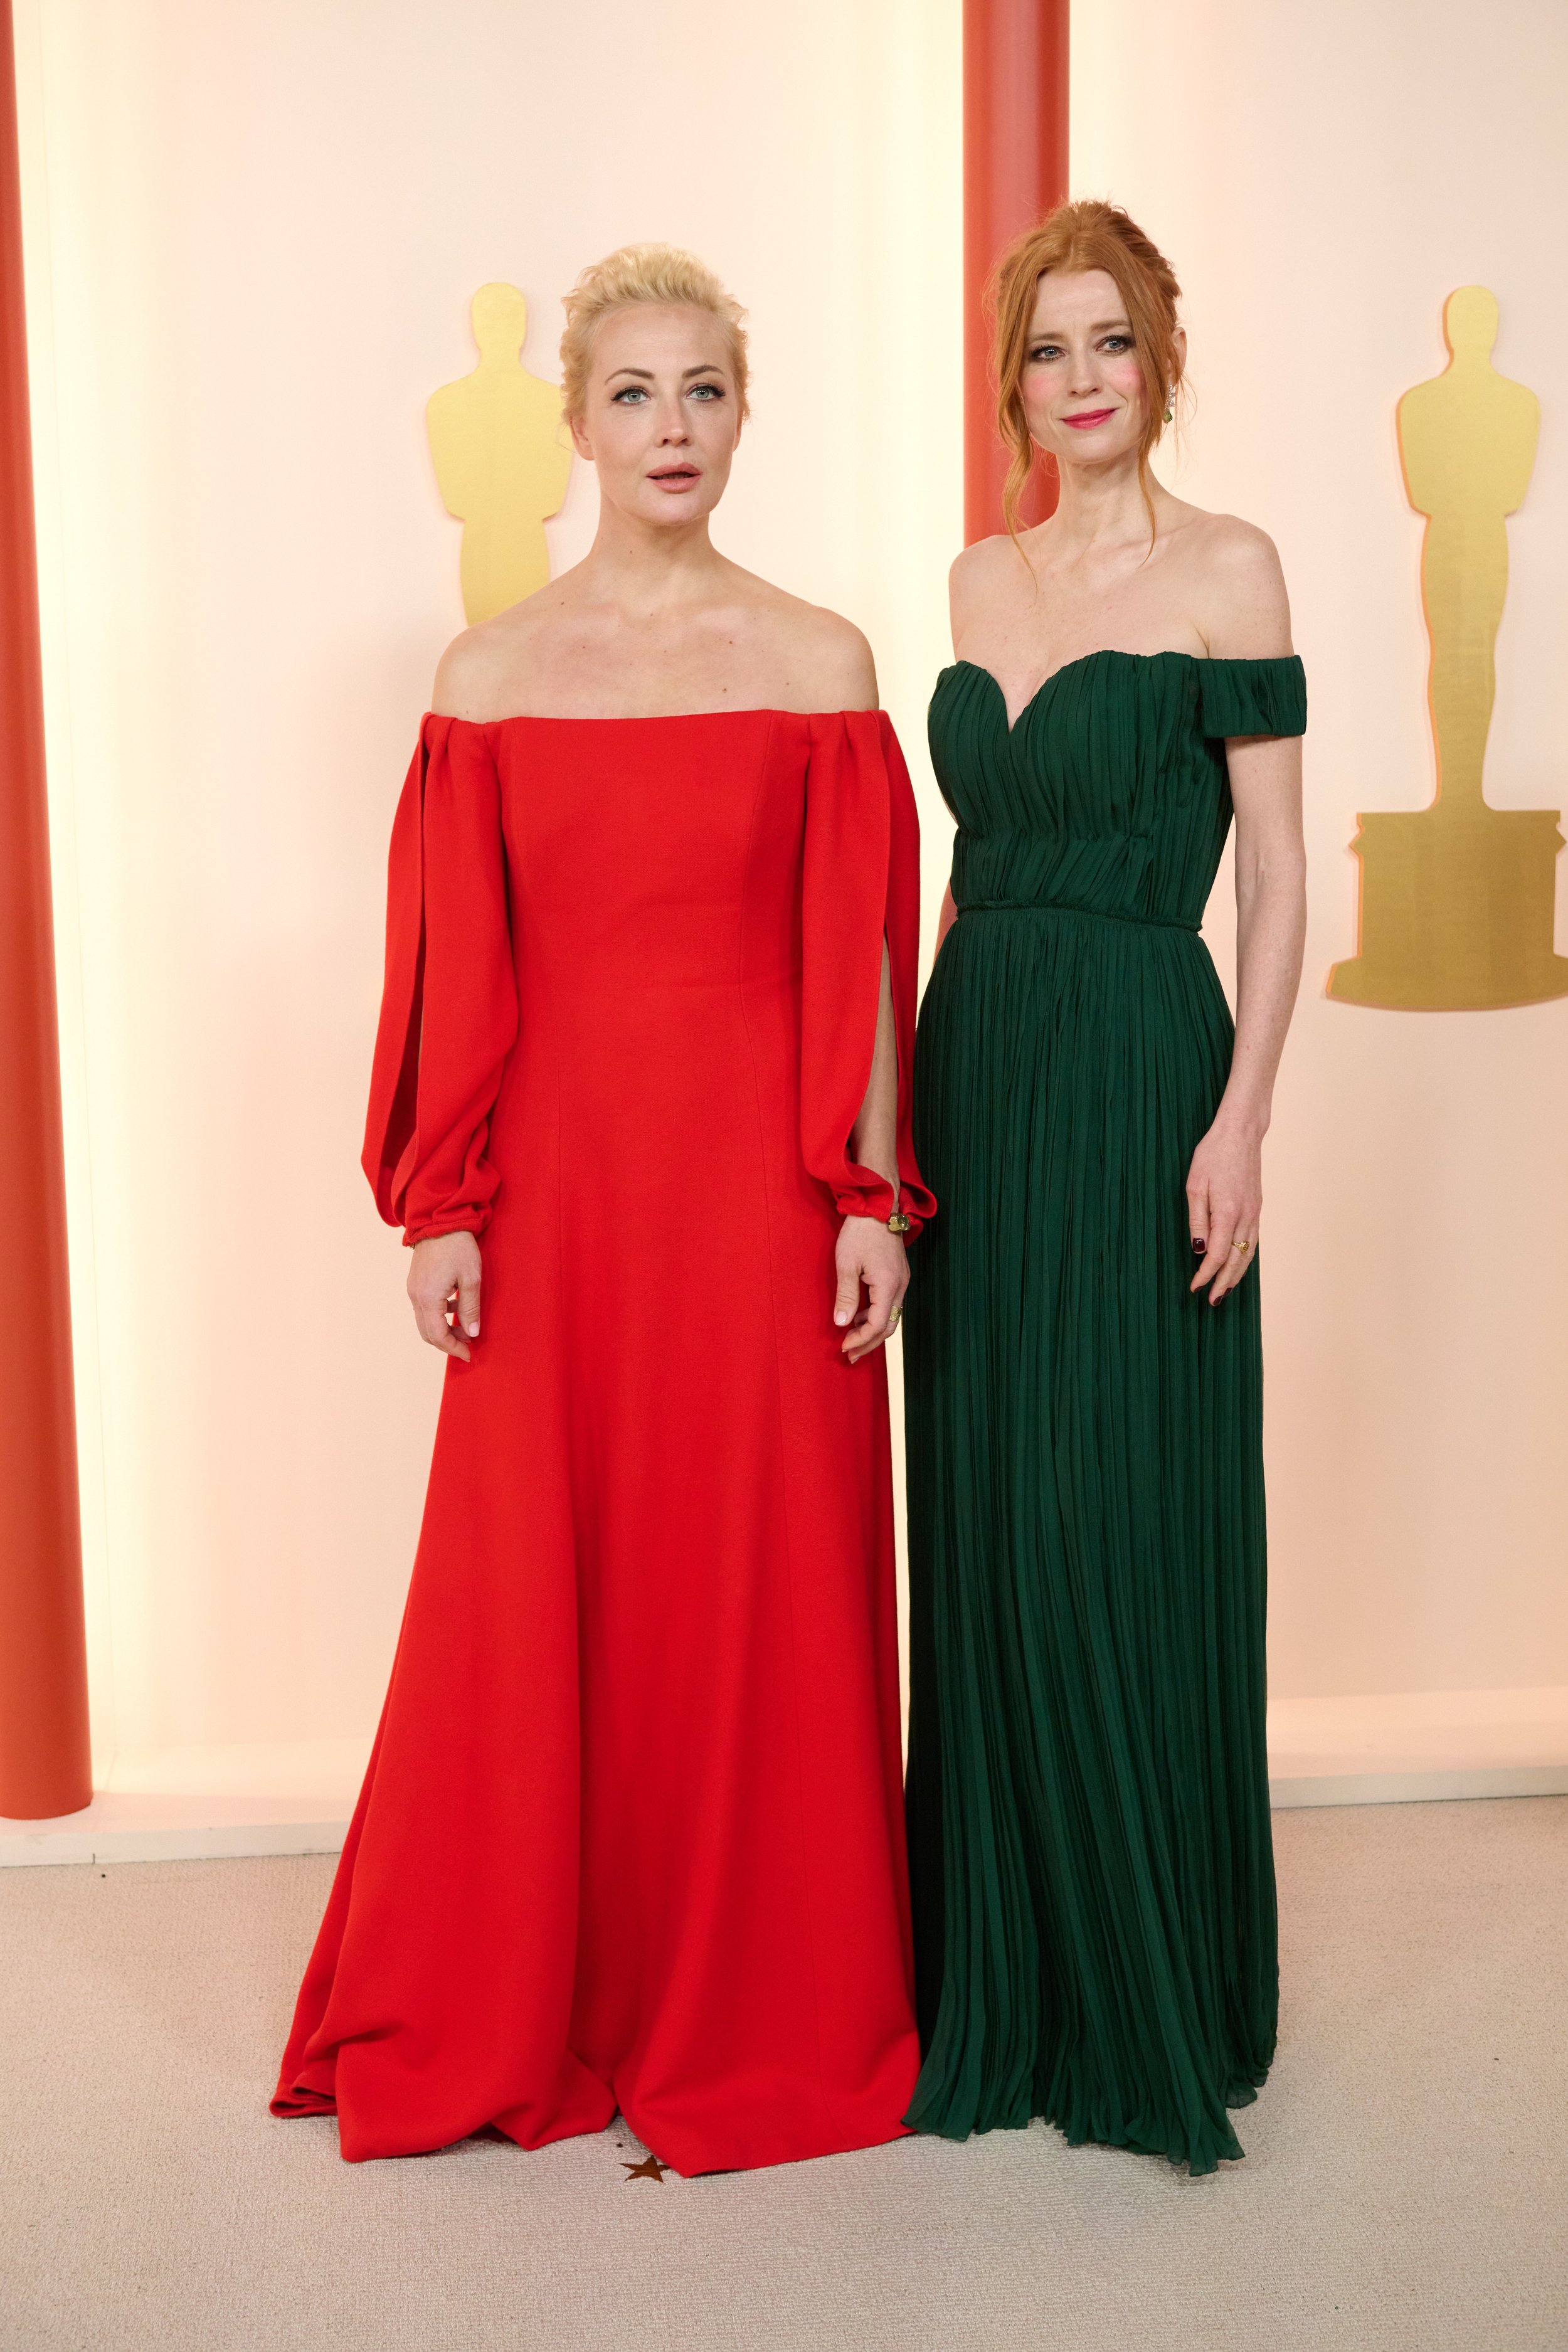 Oscar® nominees Yulia Navalnaya and Odessa Rae arrive on the red carpet at The 95th Oscars at the Dolby